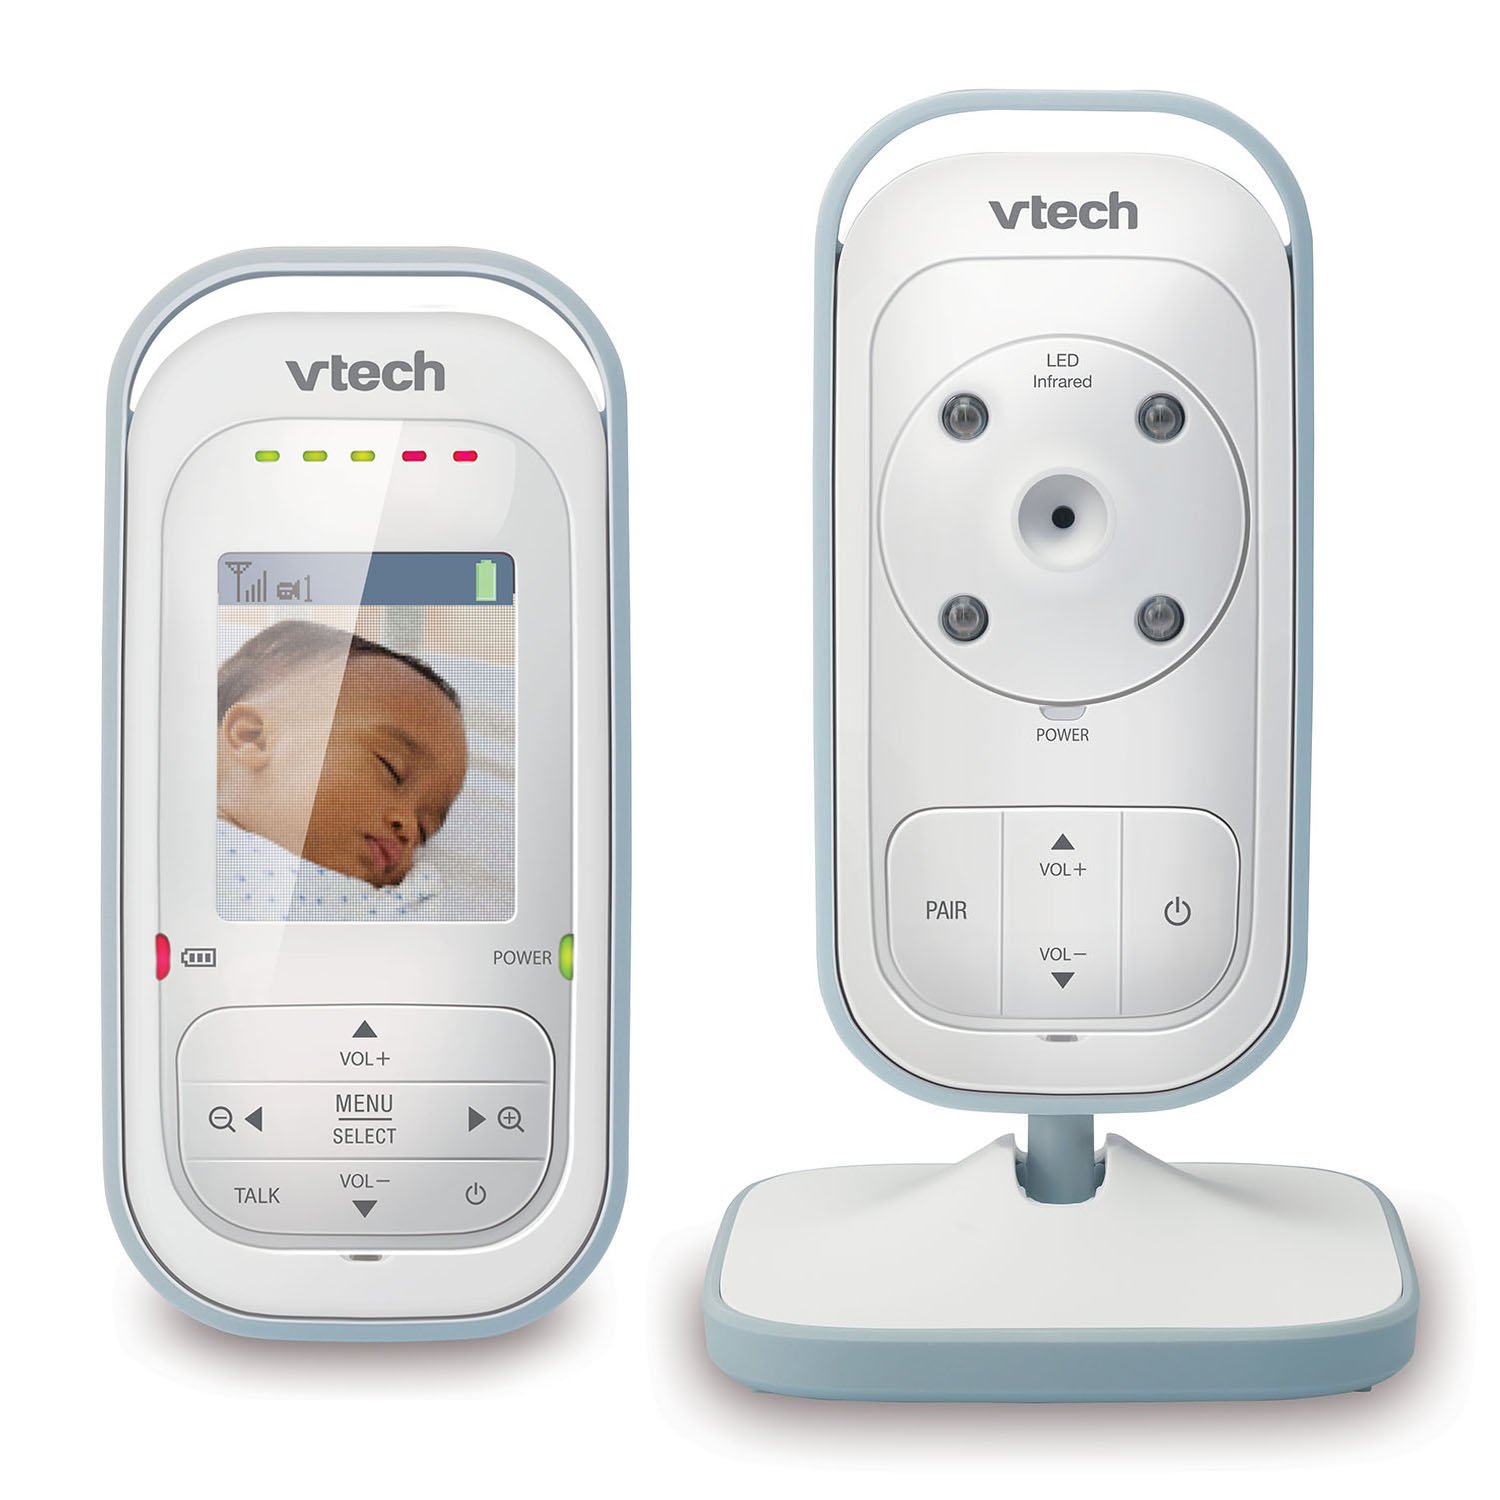 VTech VM311 Safe & Sound Video Baby Monitor with Night Vision High resolution 2" color LCD screen - image 2 of 16